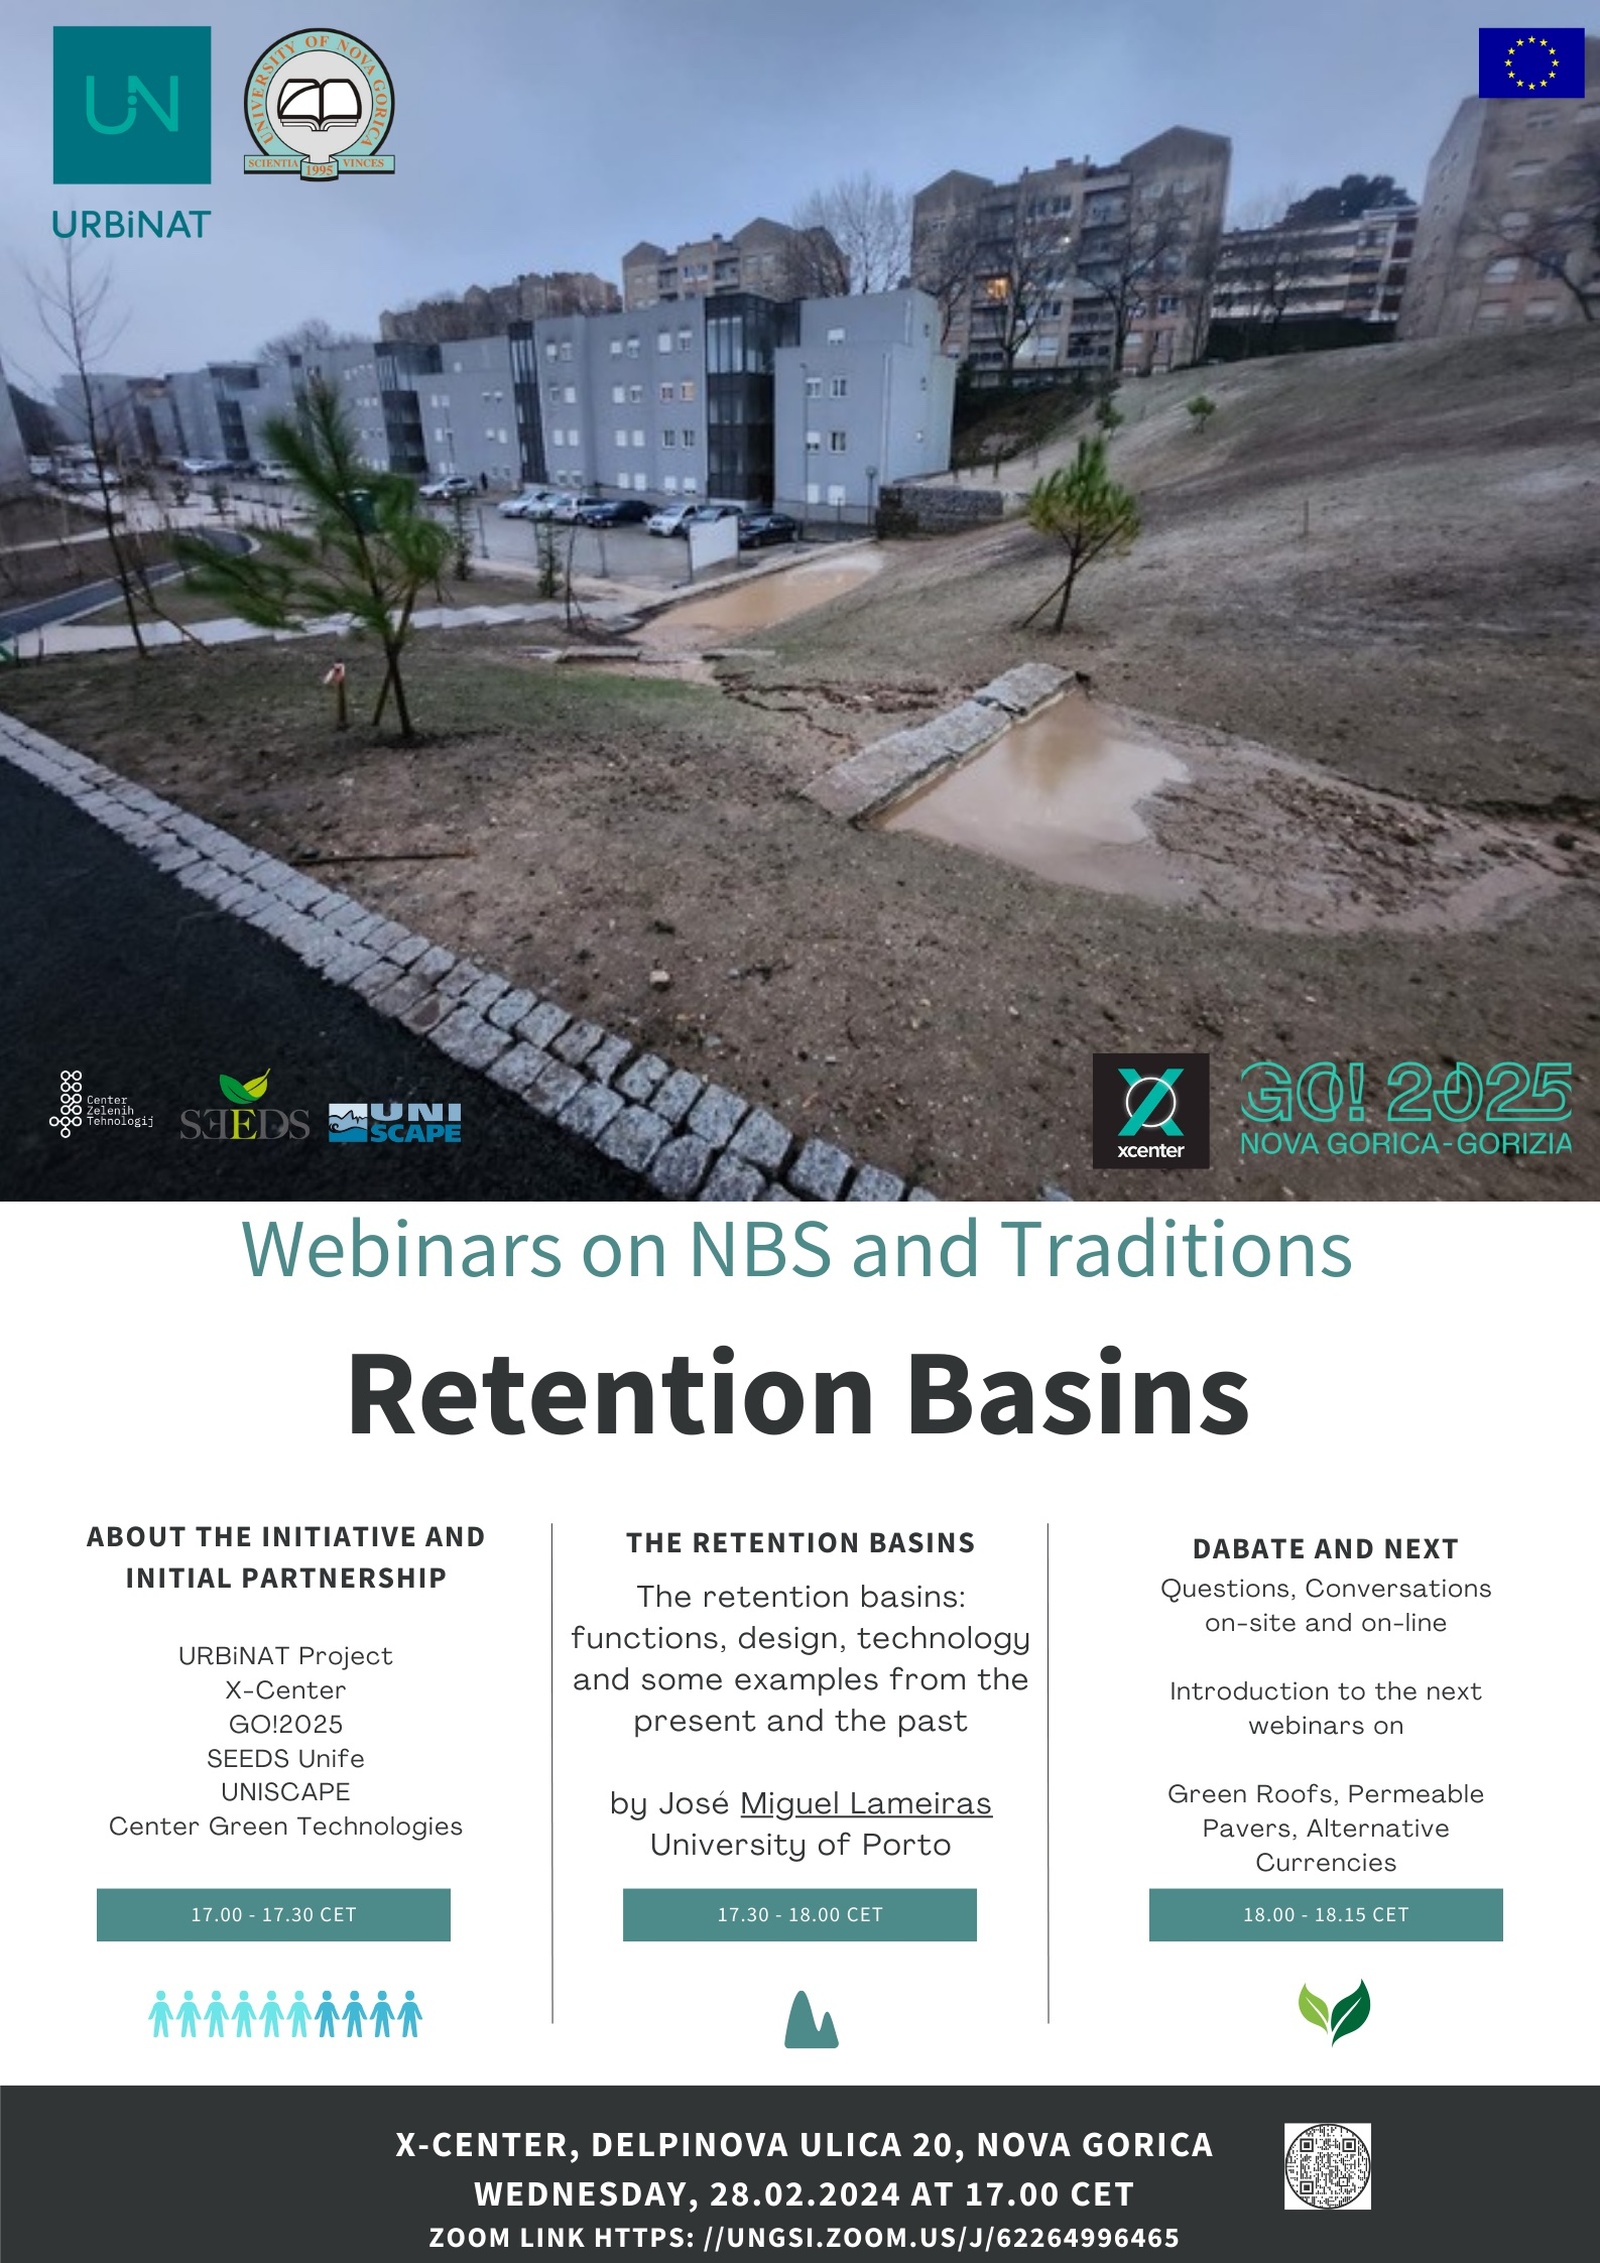 Invitation - Webinar on NBS and Traditions (Retention Basins)